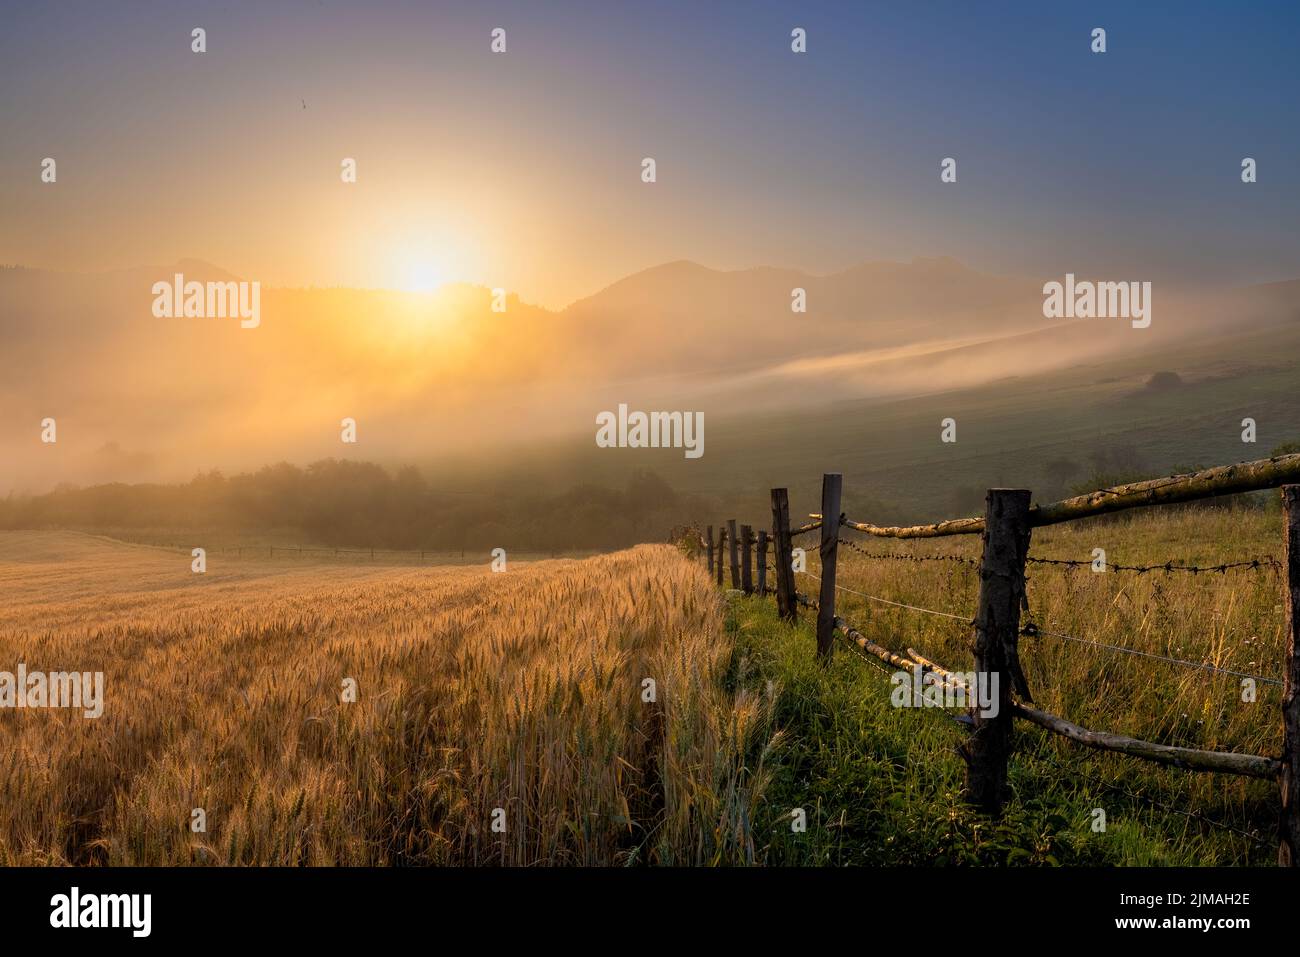 Lanscape view of rye field on the hill with old fence and foggy mountains in the background at sunrise. Stock Photo